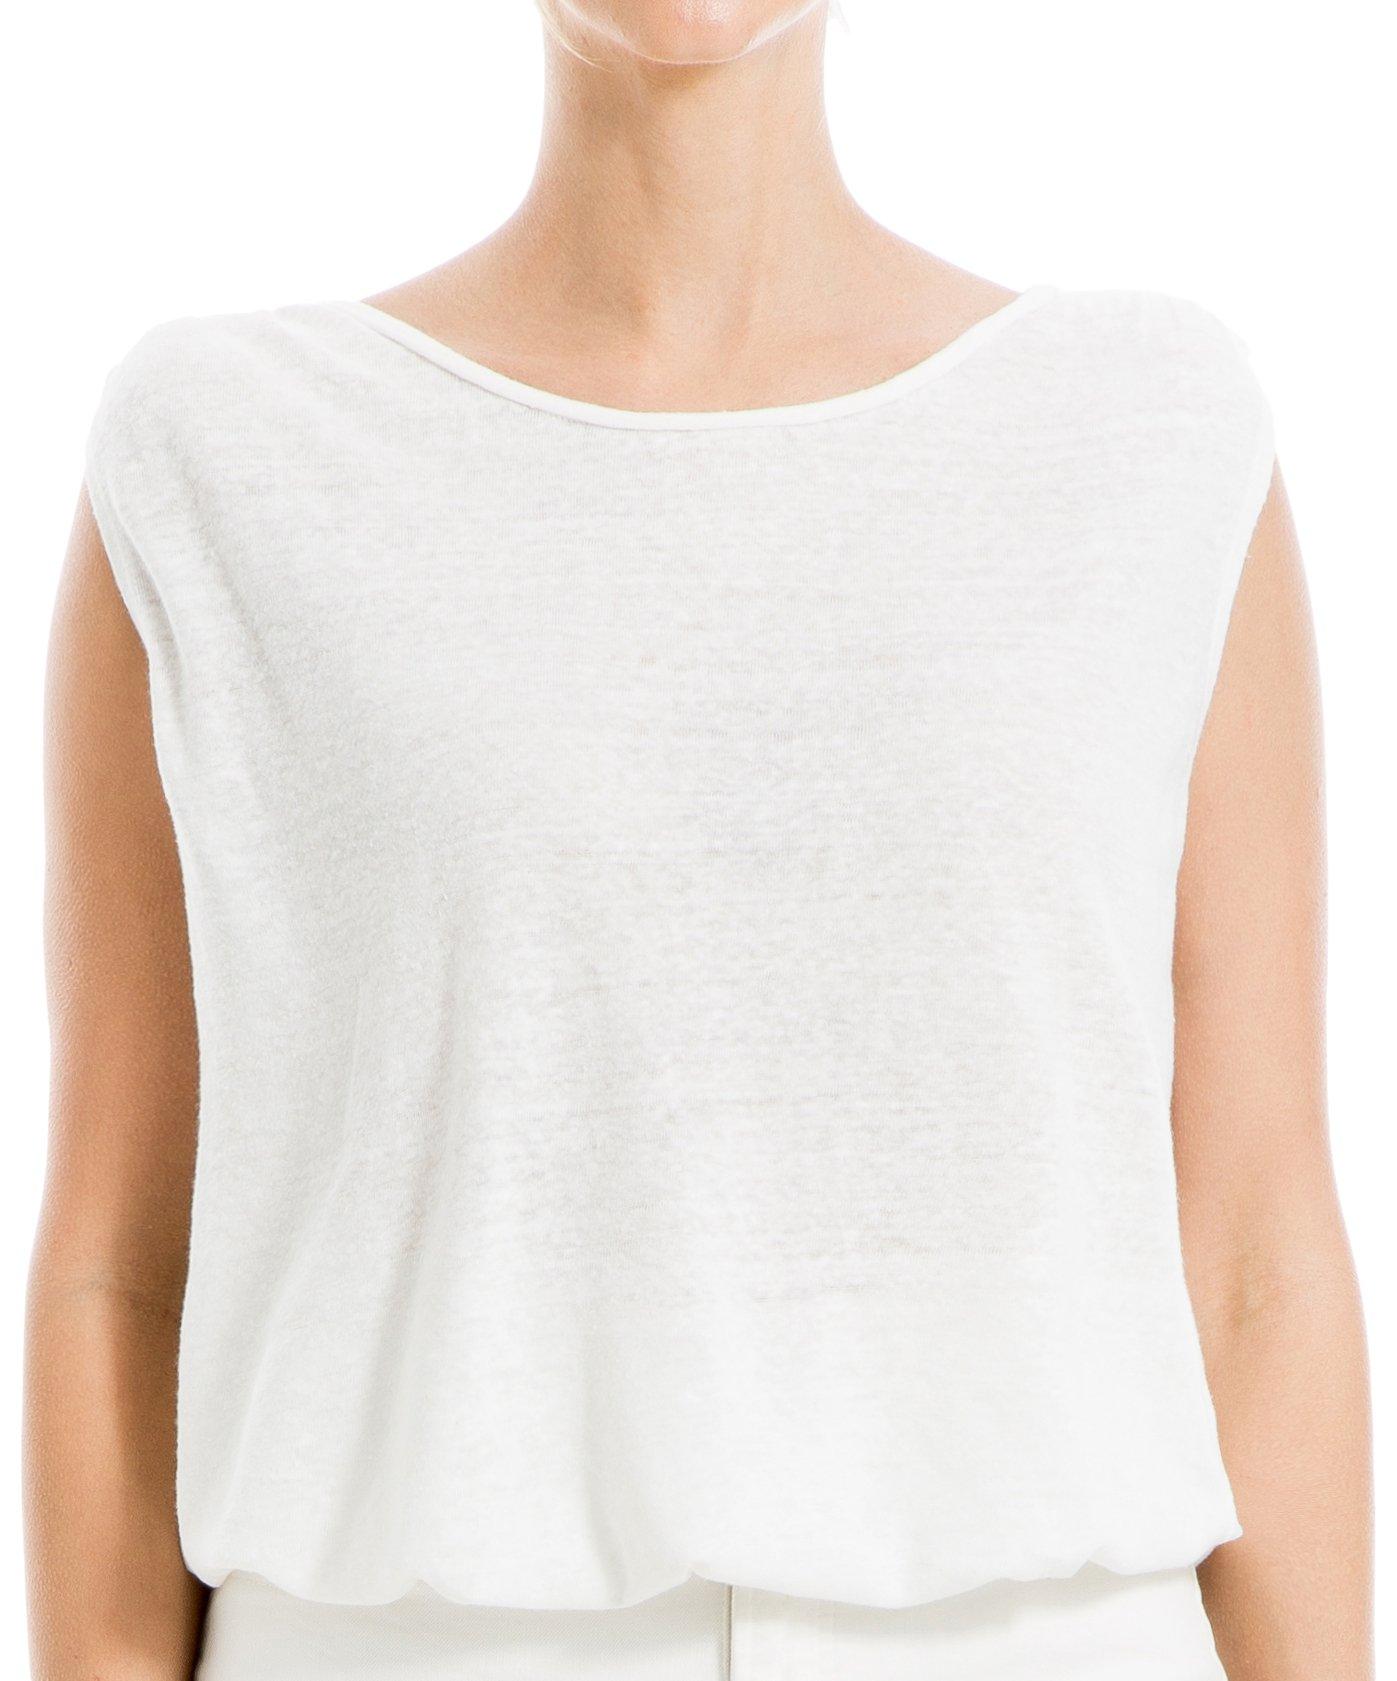 Womens Solid Sleeveless Top